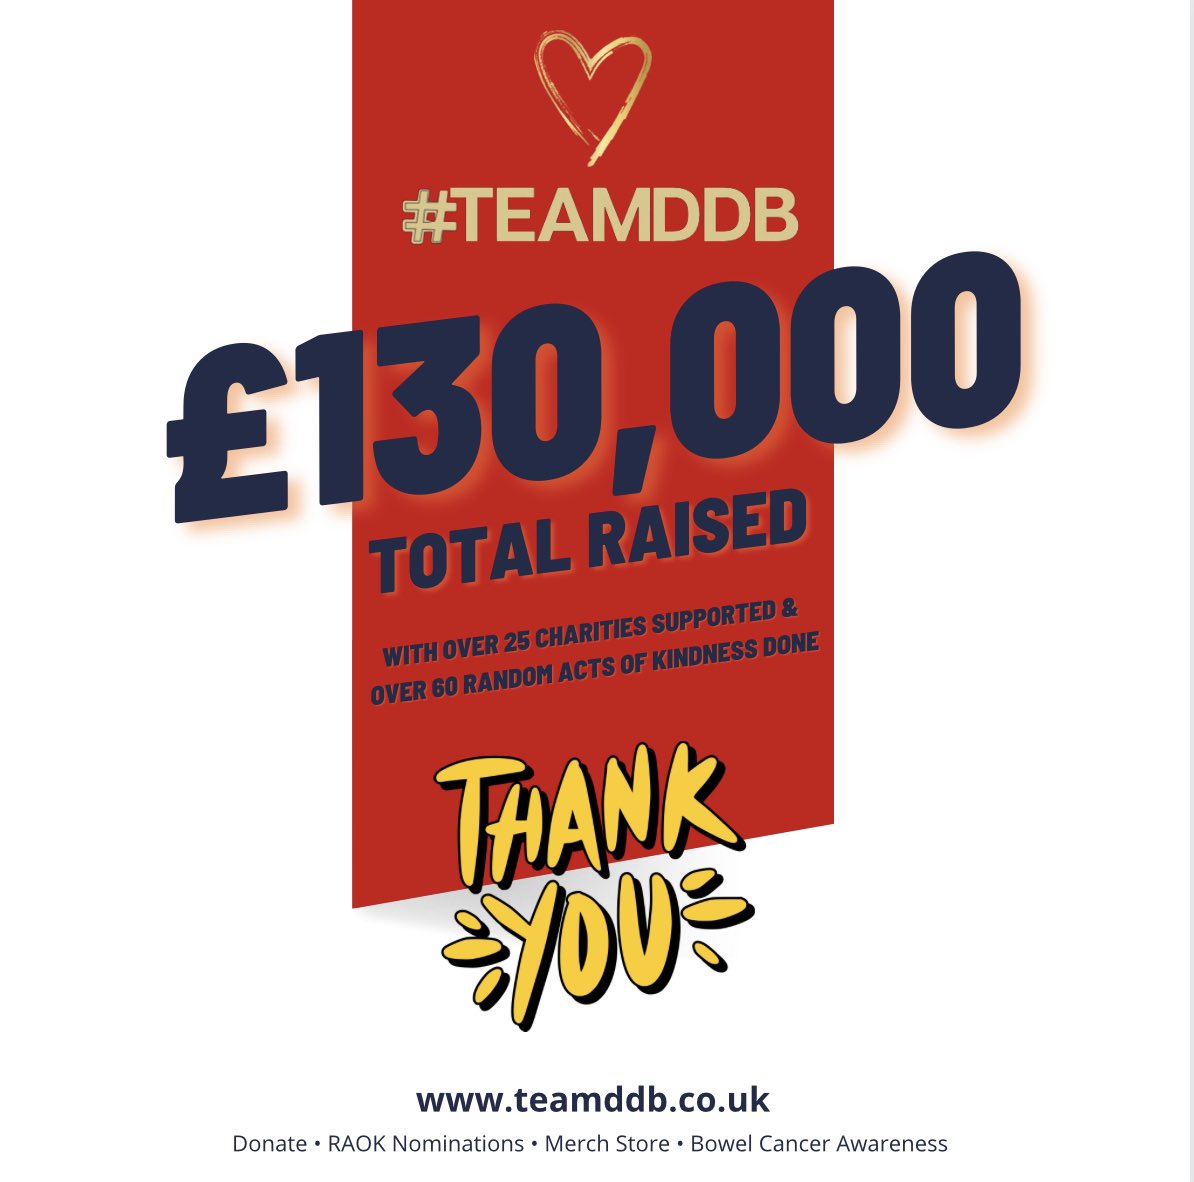 Thank you to everyone who has ever supported #TeamDDB This is truly fantastic ❤️ we are so proud of what we achieved for the local community. 

Personally it gives me justification for my condition, & all I have been through. Truly turning a negative into a positive ❤️ a legacy x